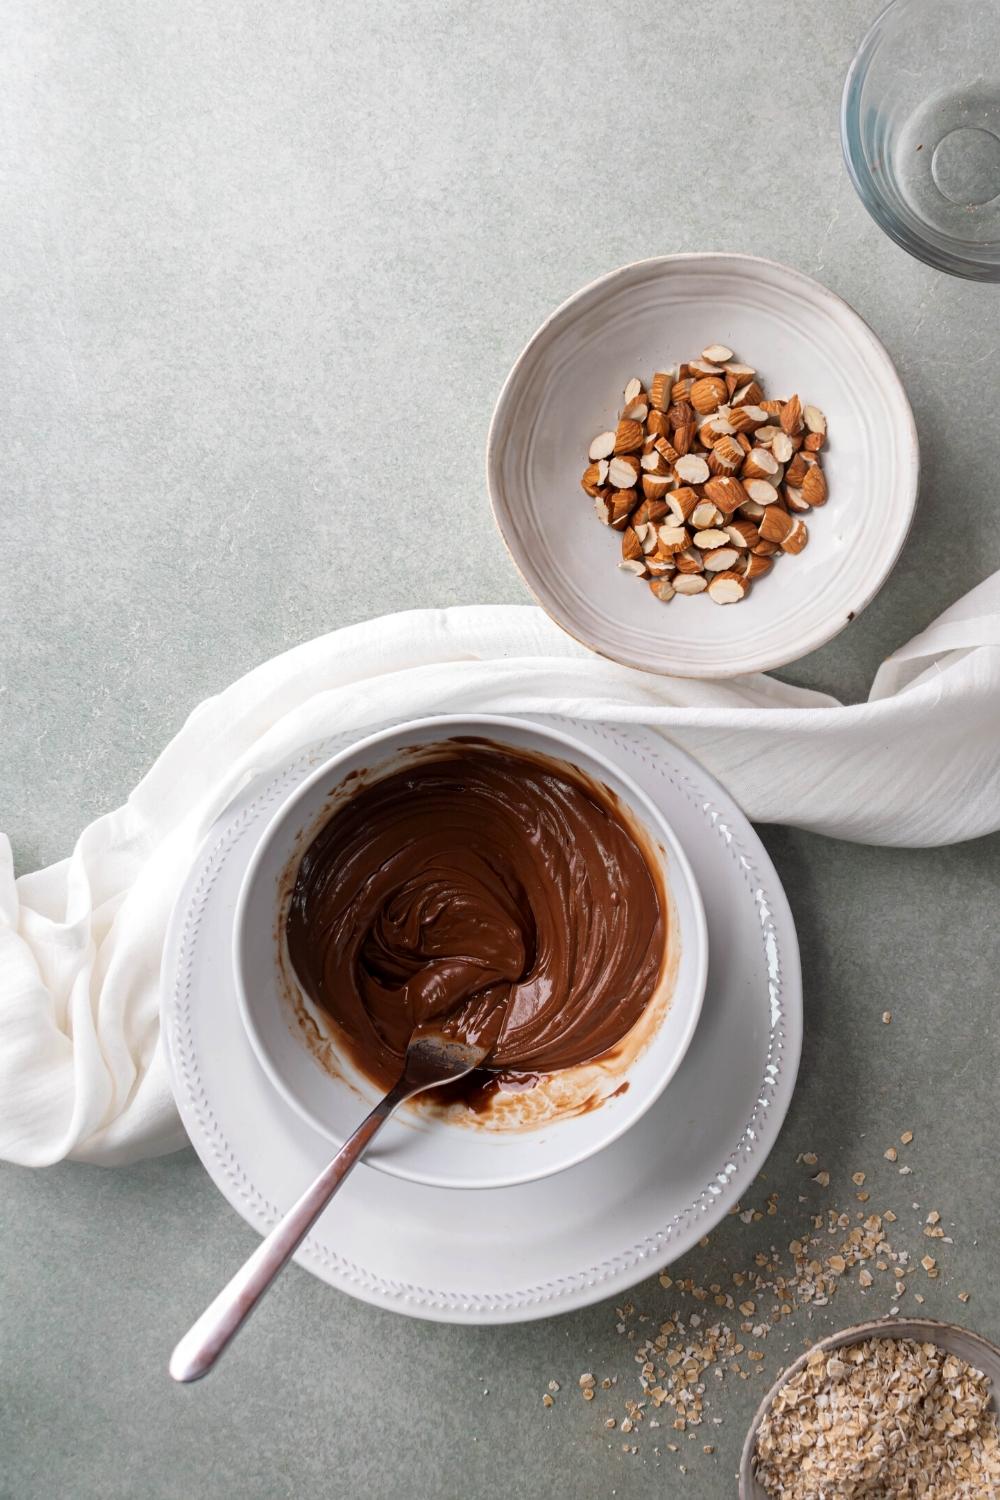 A white bowl filled with chocolate sauce with the spoon in it with a bowl of chopped almonds behind it on the gray counter.